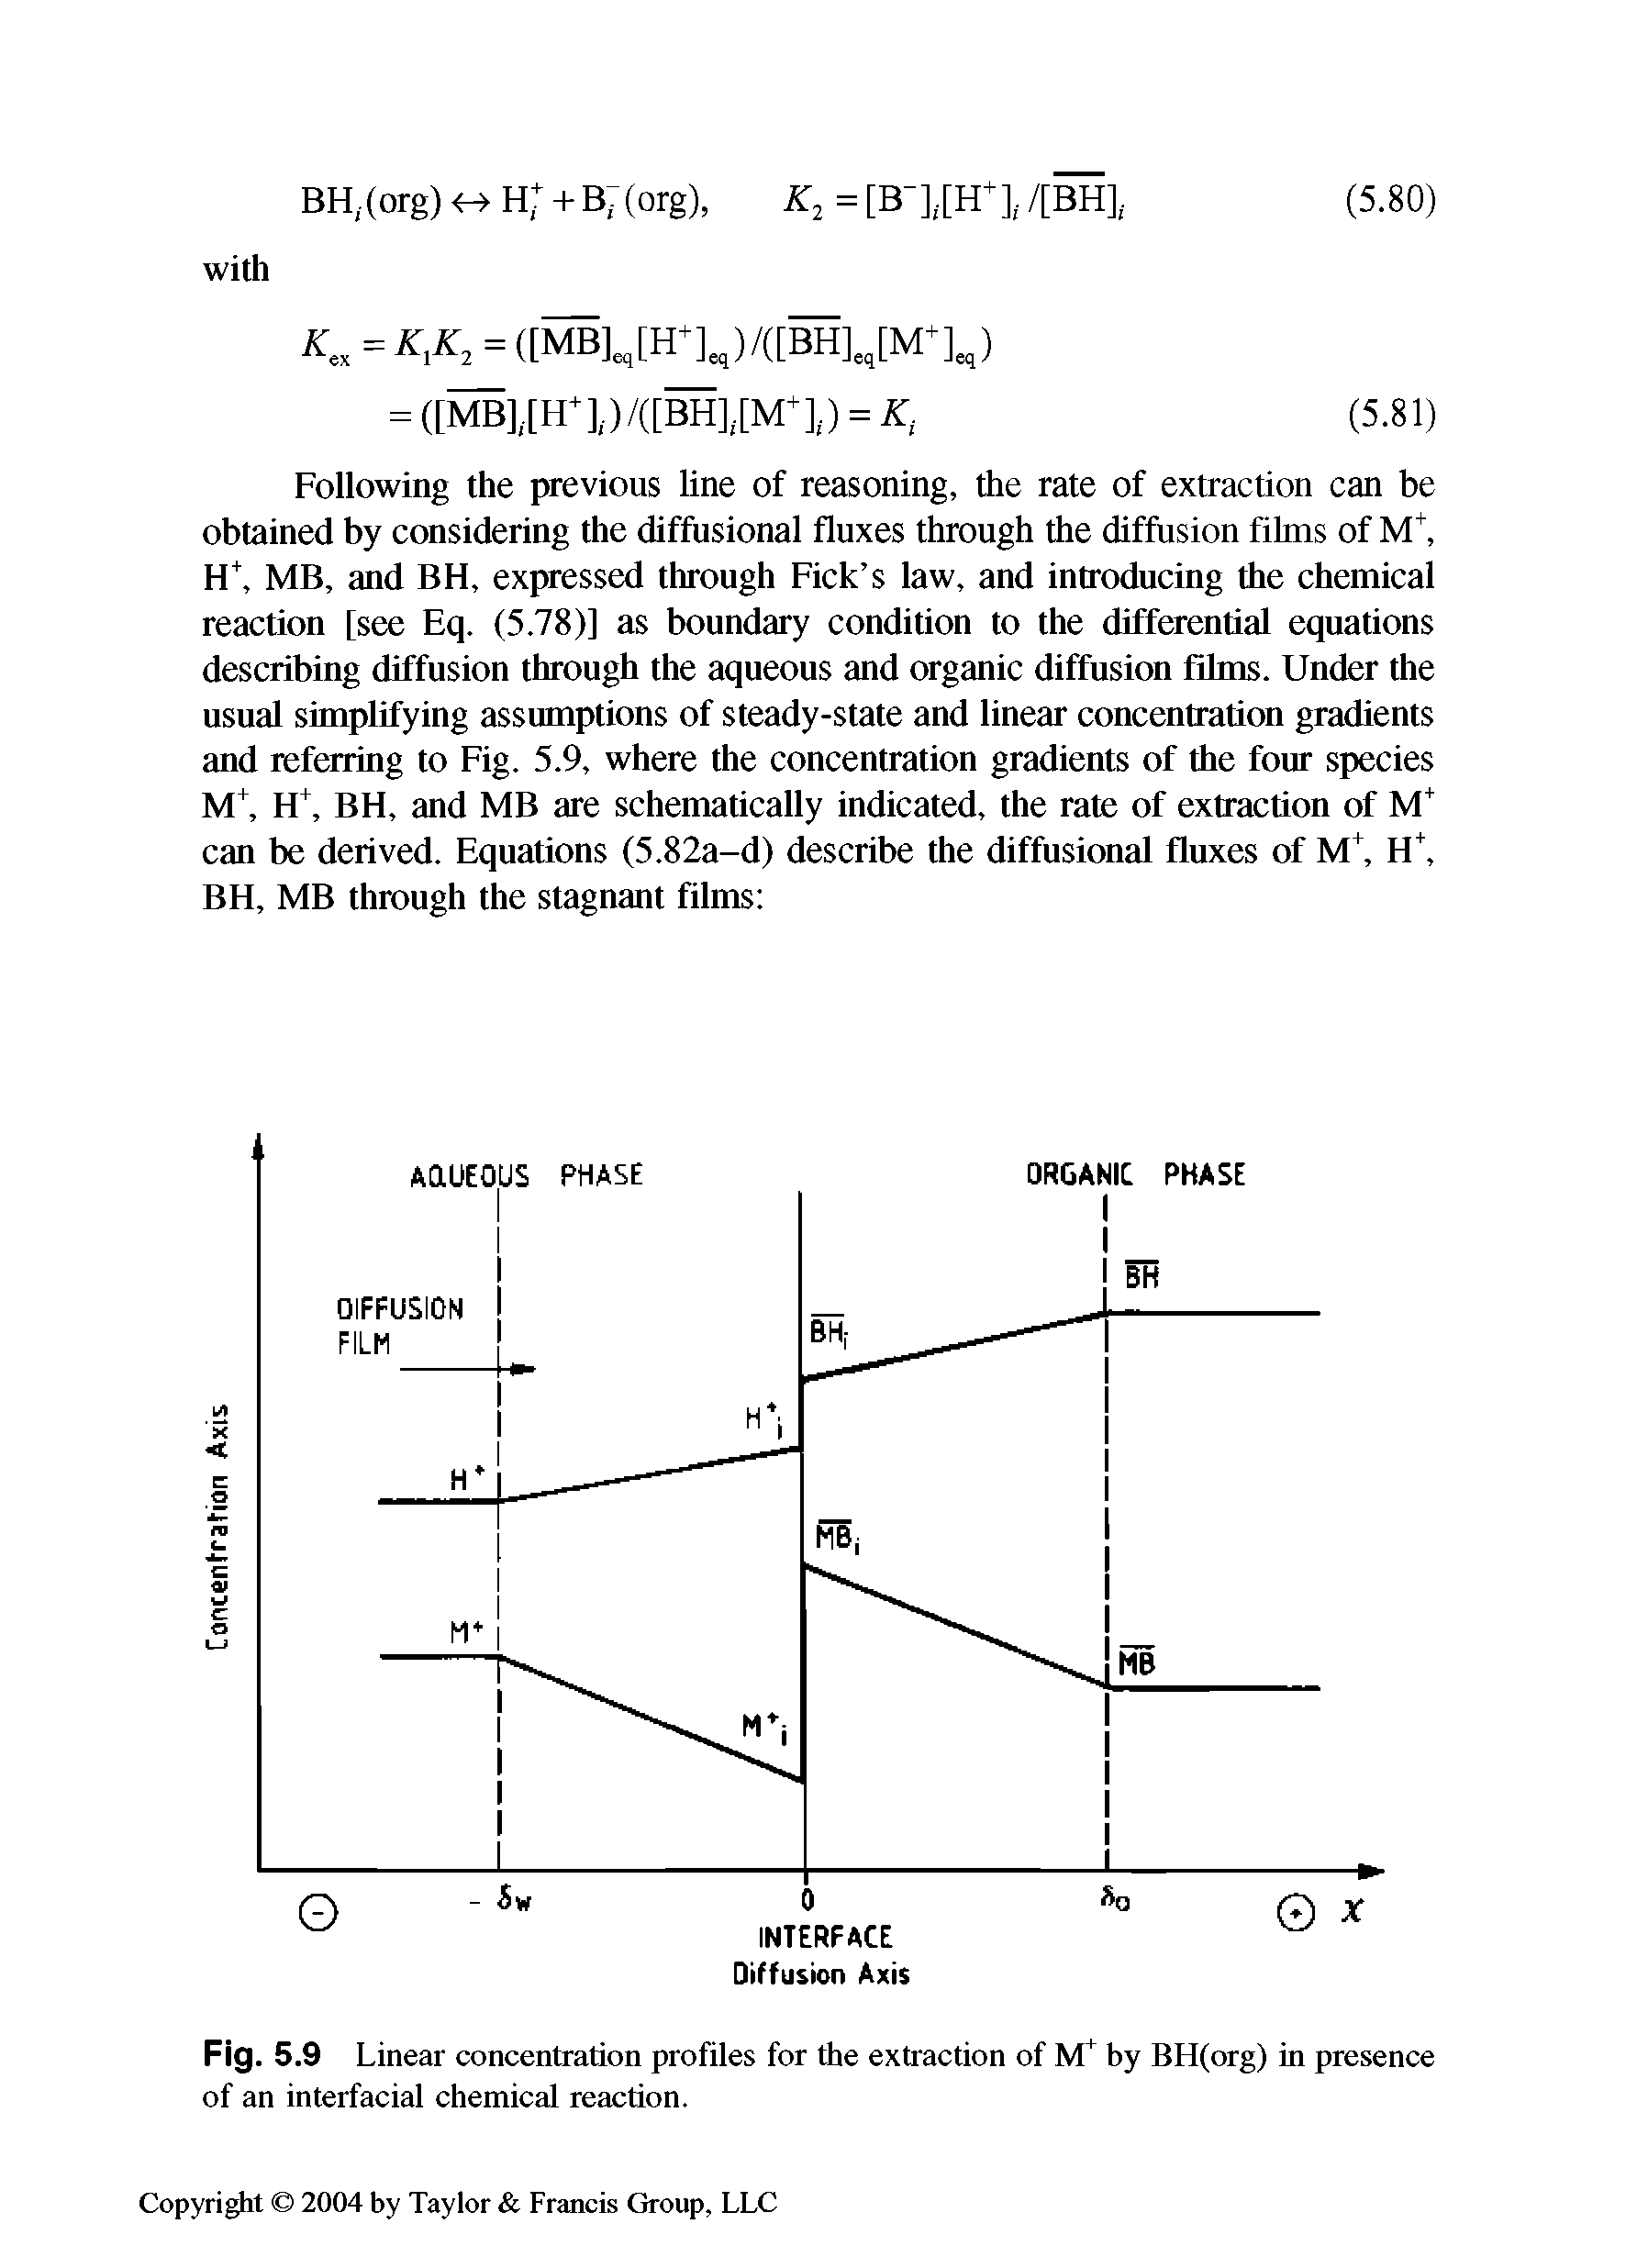 Fig. 5.9 Linear concentration profiles for the extraction of by BH(org) in presence of an interfacial chemical reaction.